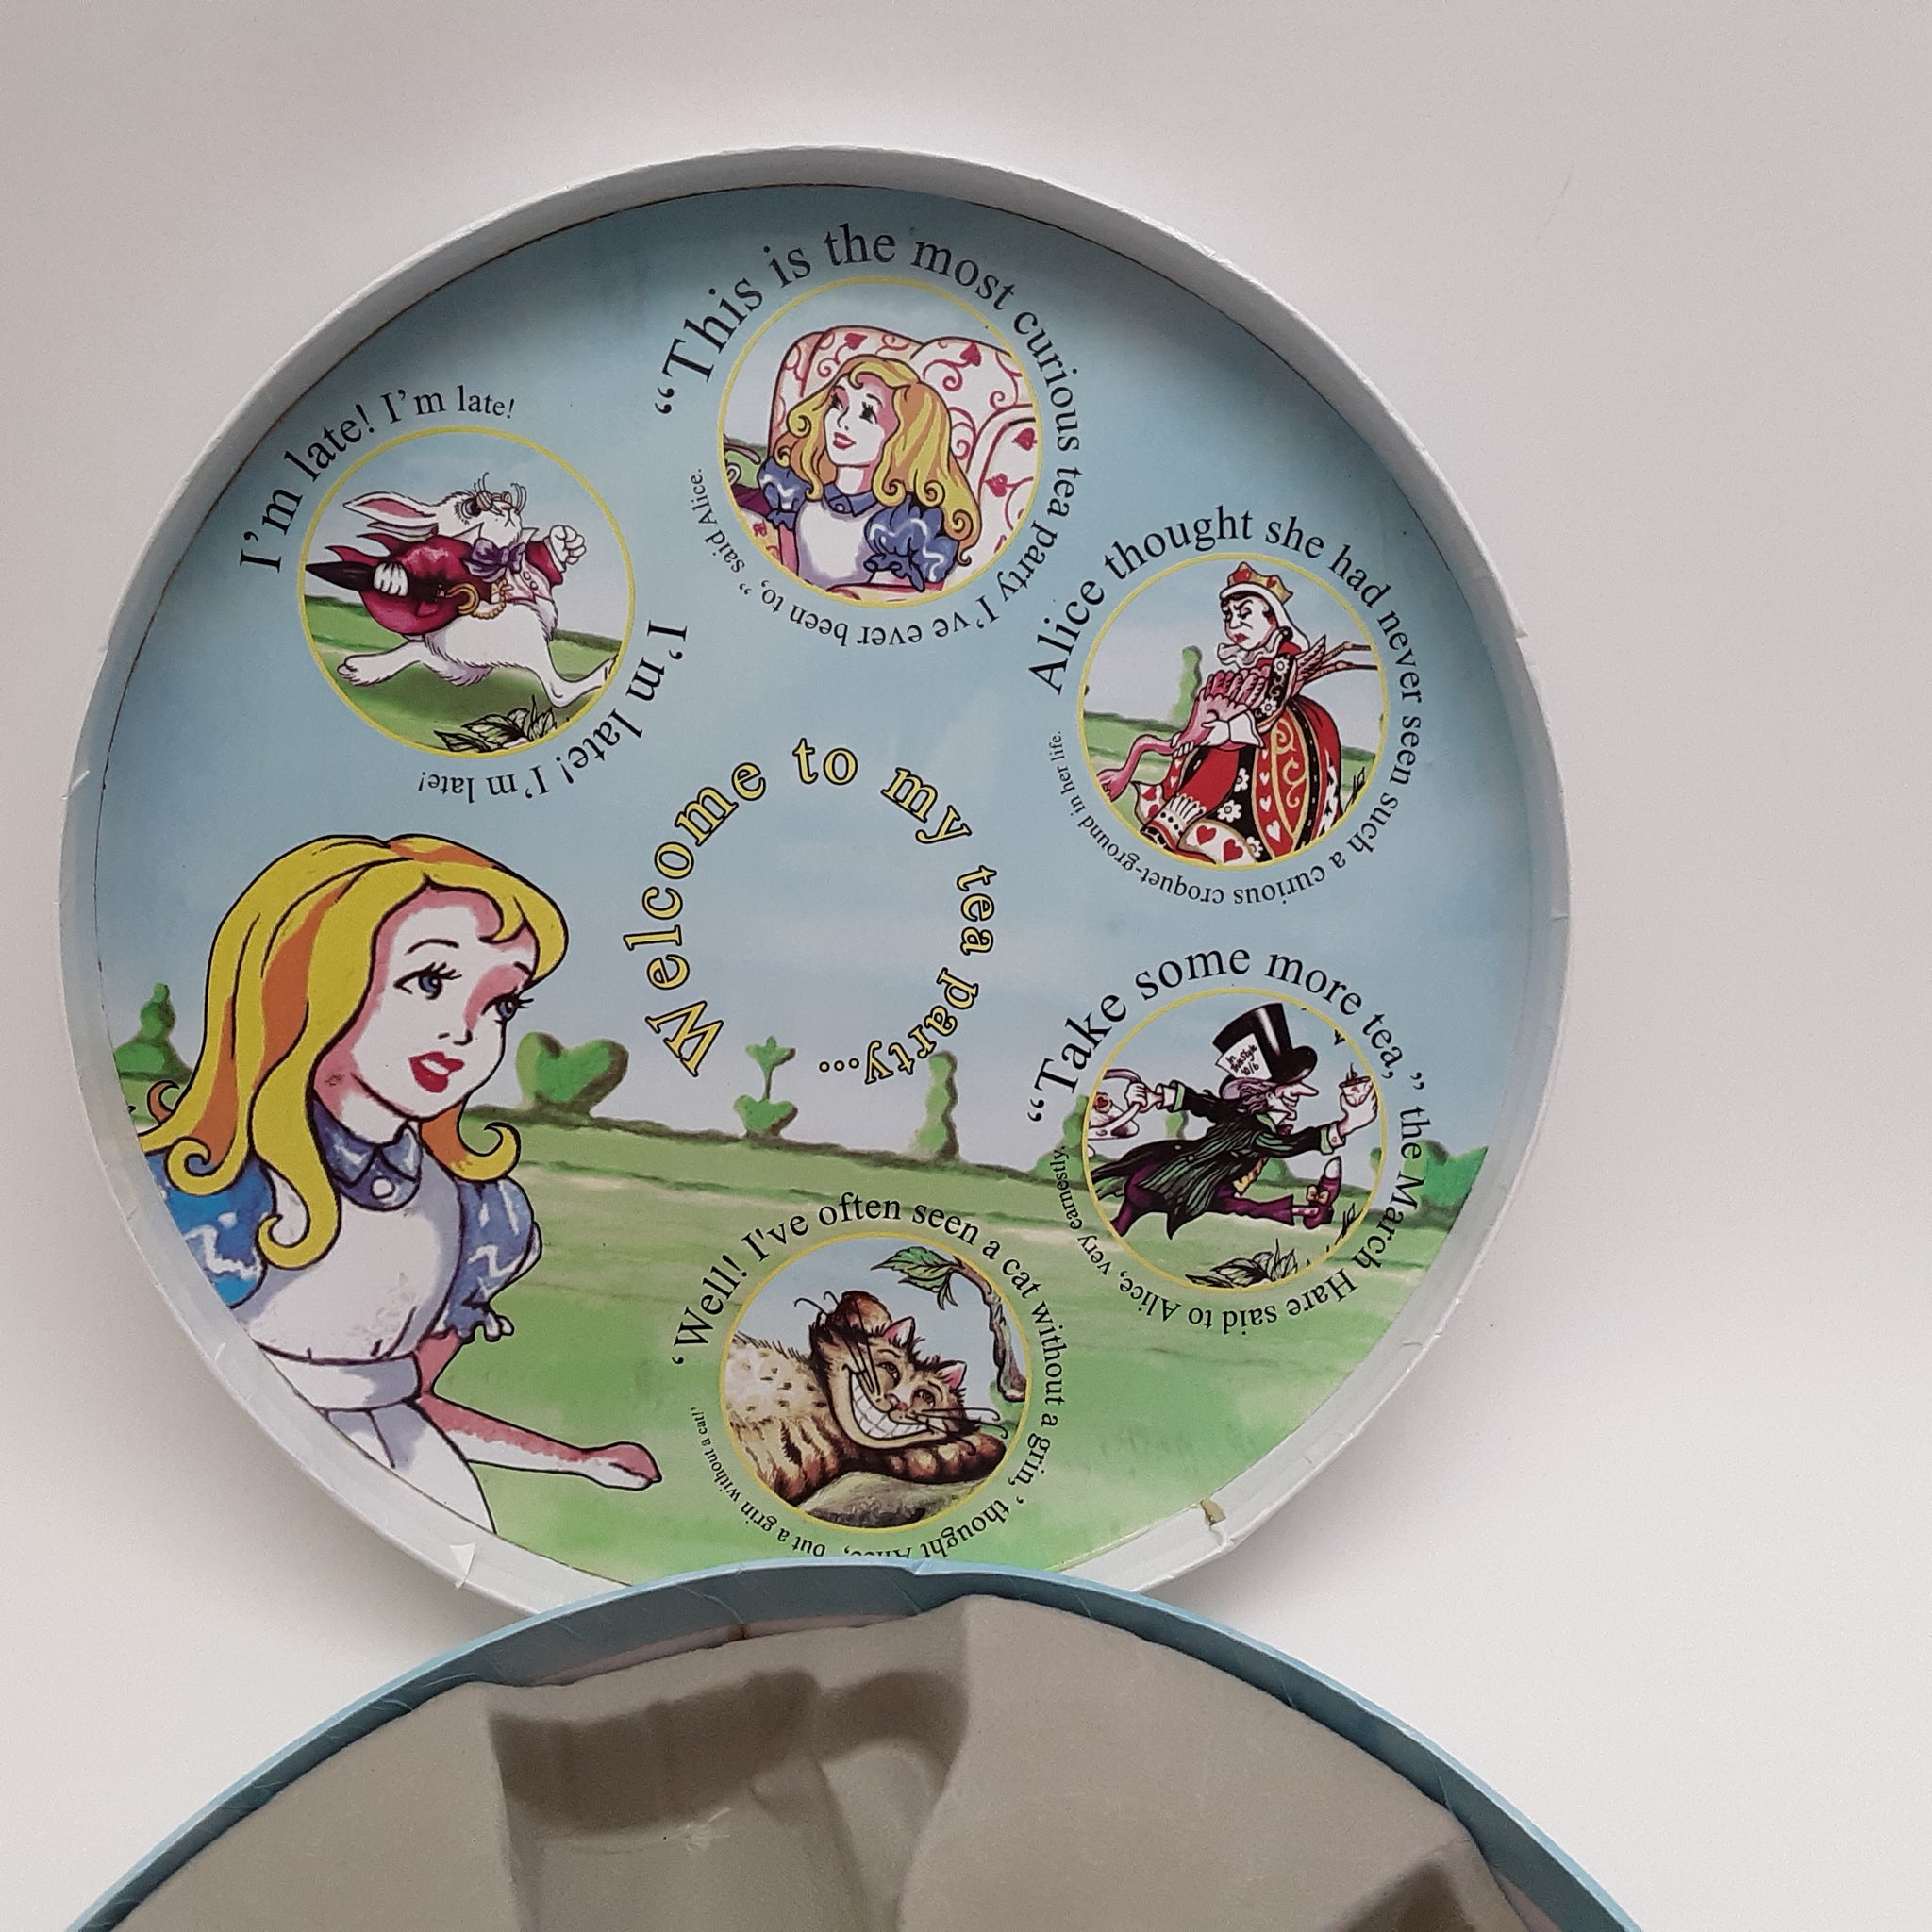 Paul Cardew Alice in Wonderland Mad Hatter Tea Party Mugs - CLEARANCE SALE  50% OFF!